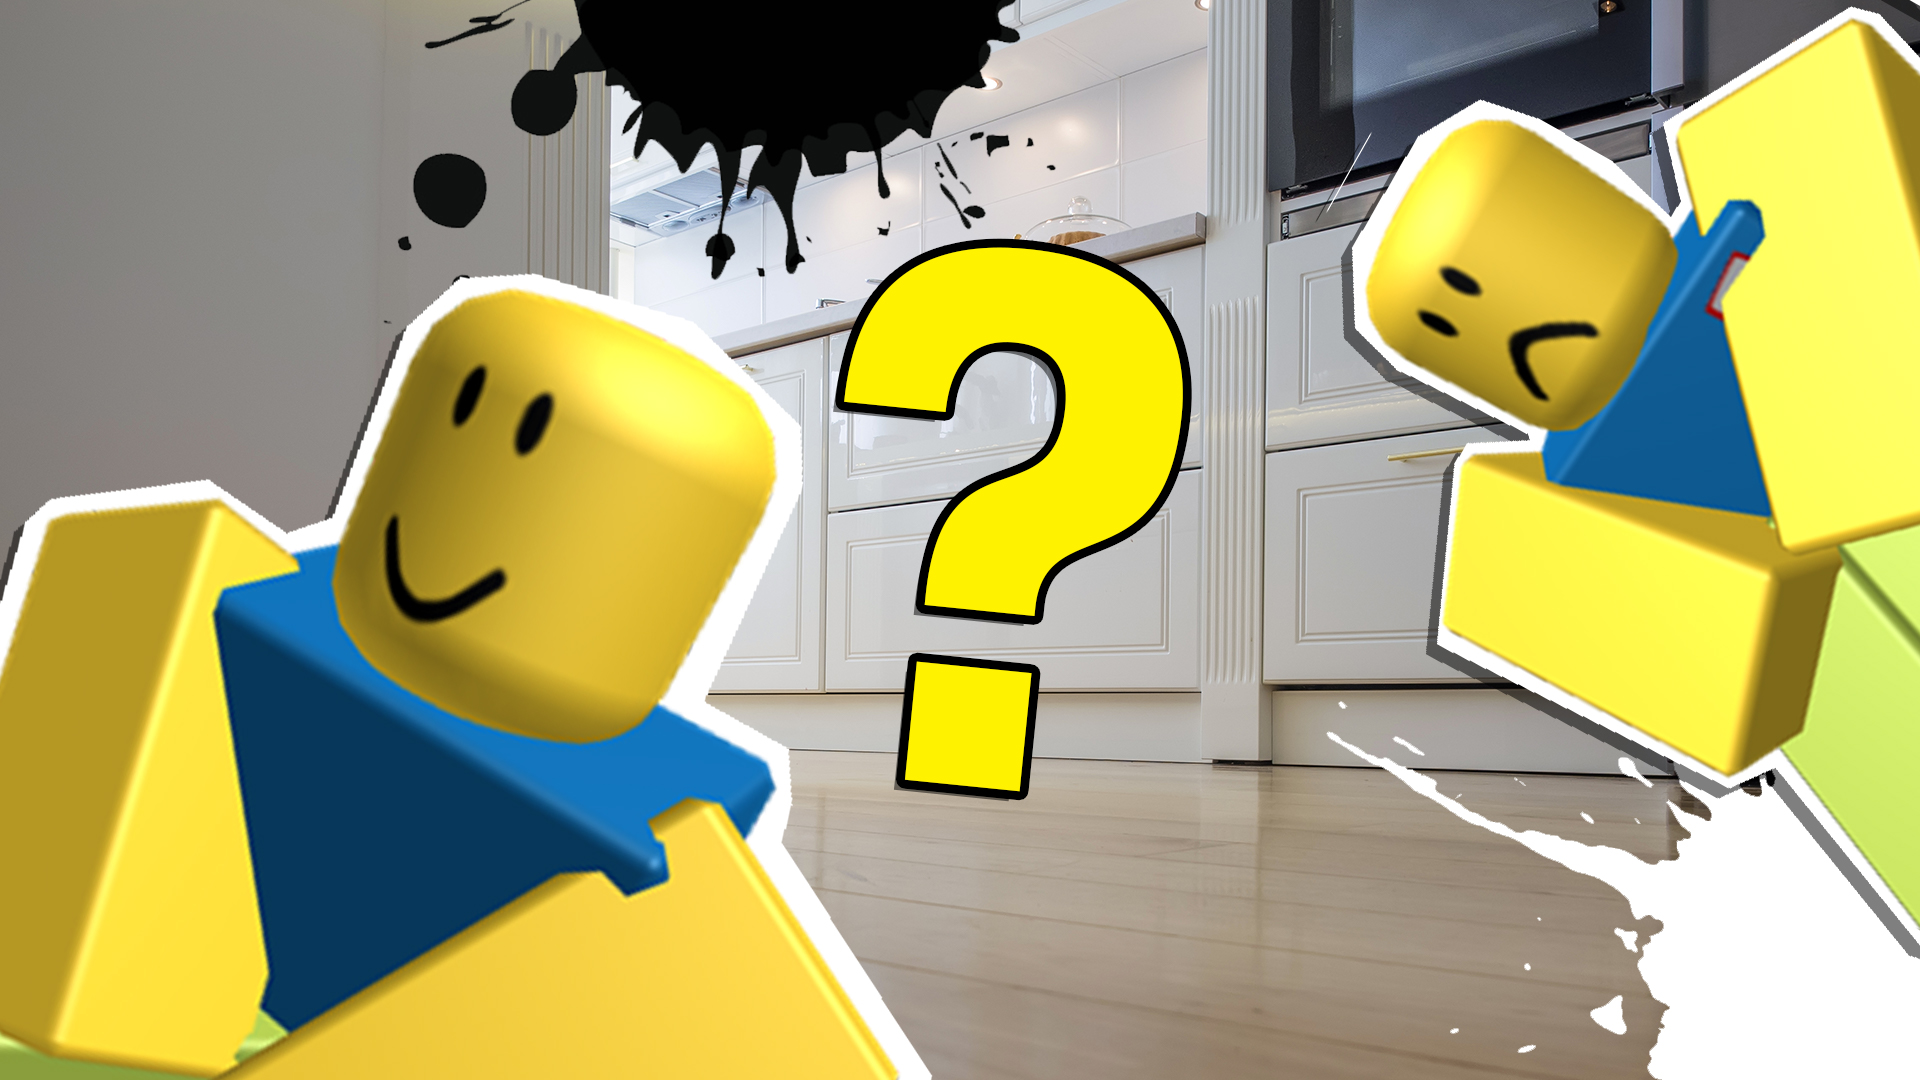 Roblox Speed Draw Quiz: What Would You Draw?